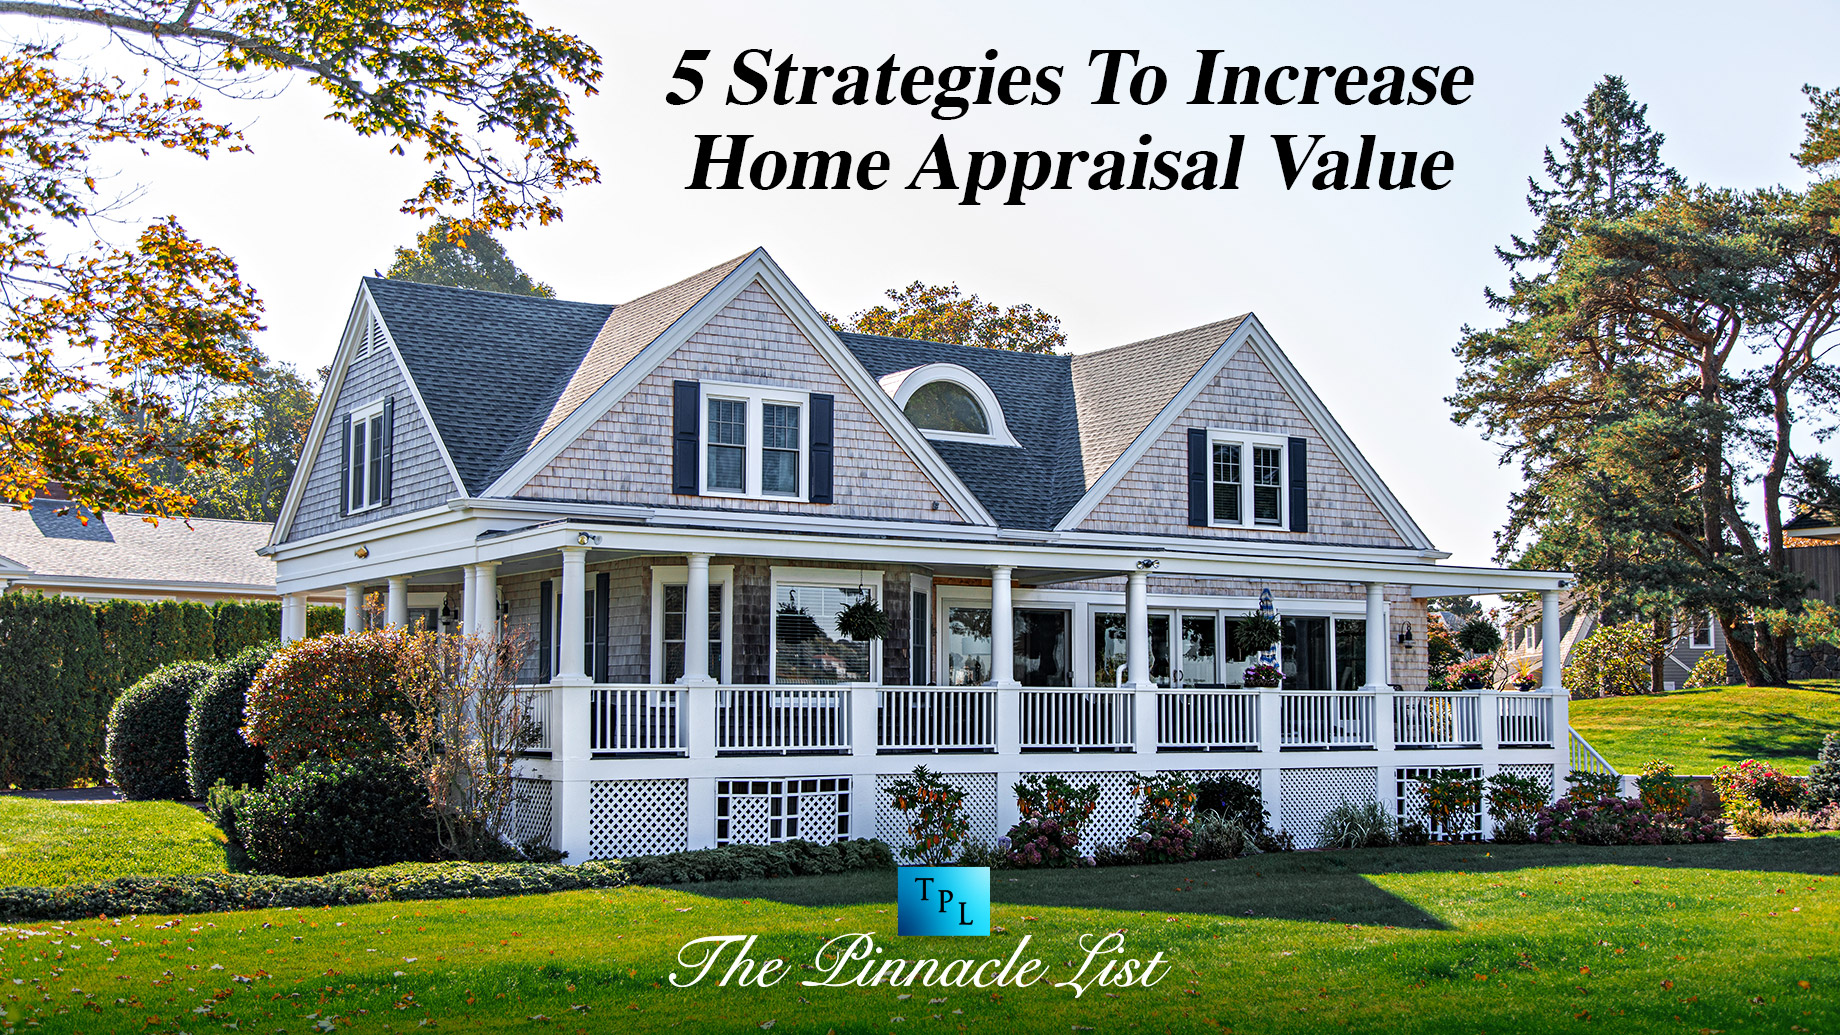 5 Strategies To Increase Home Appraisal Value